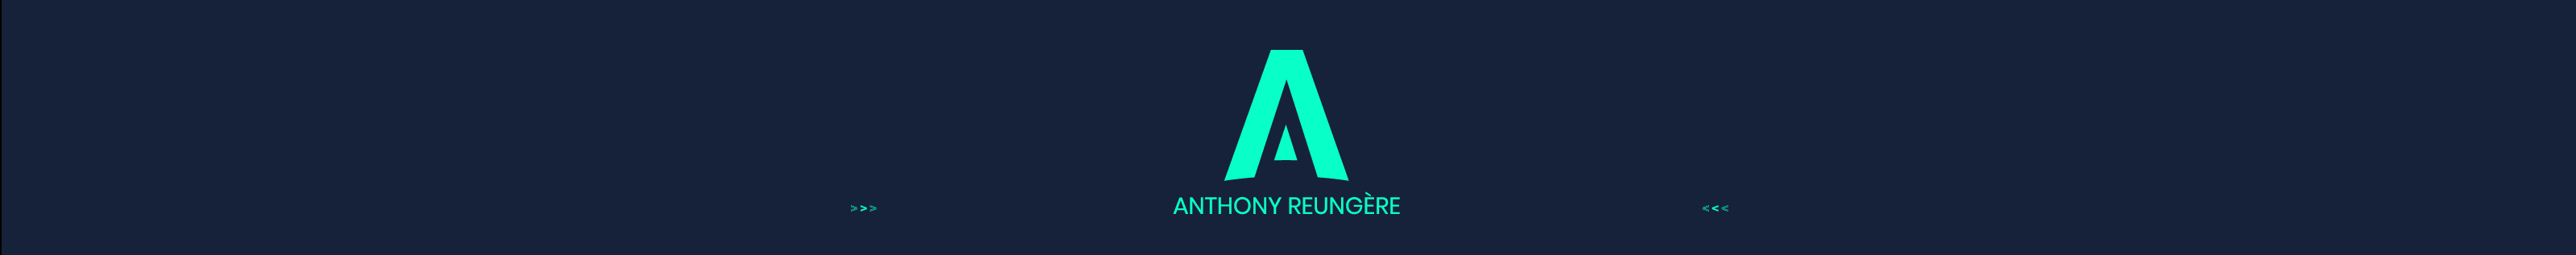 Anthony Reungère's profile banner